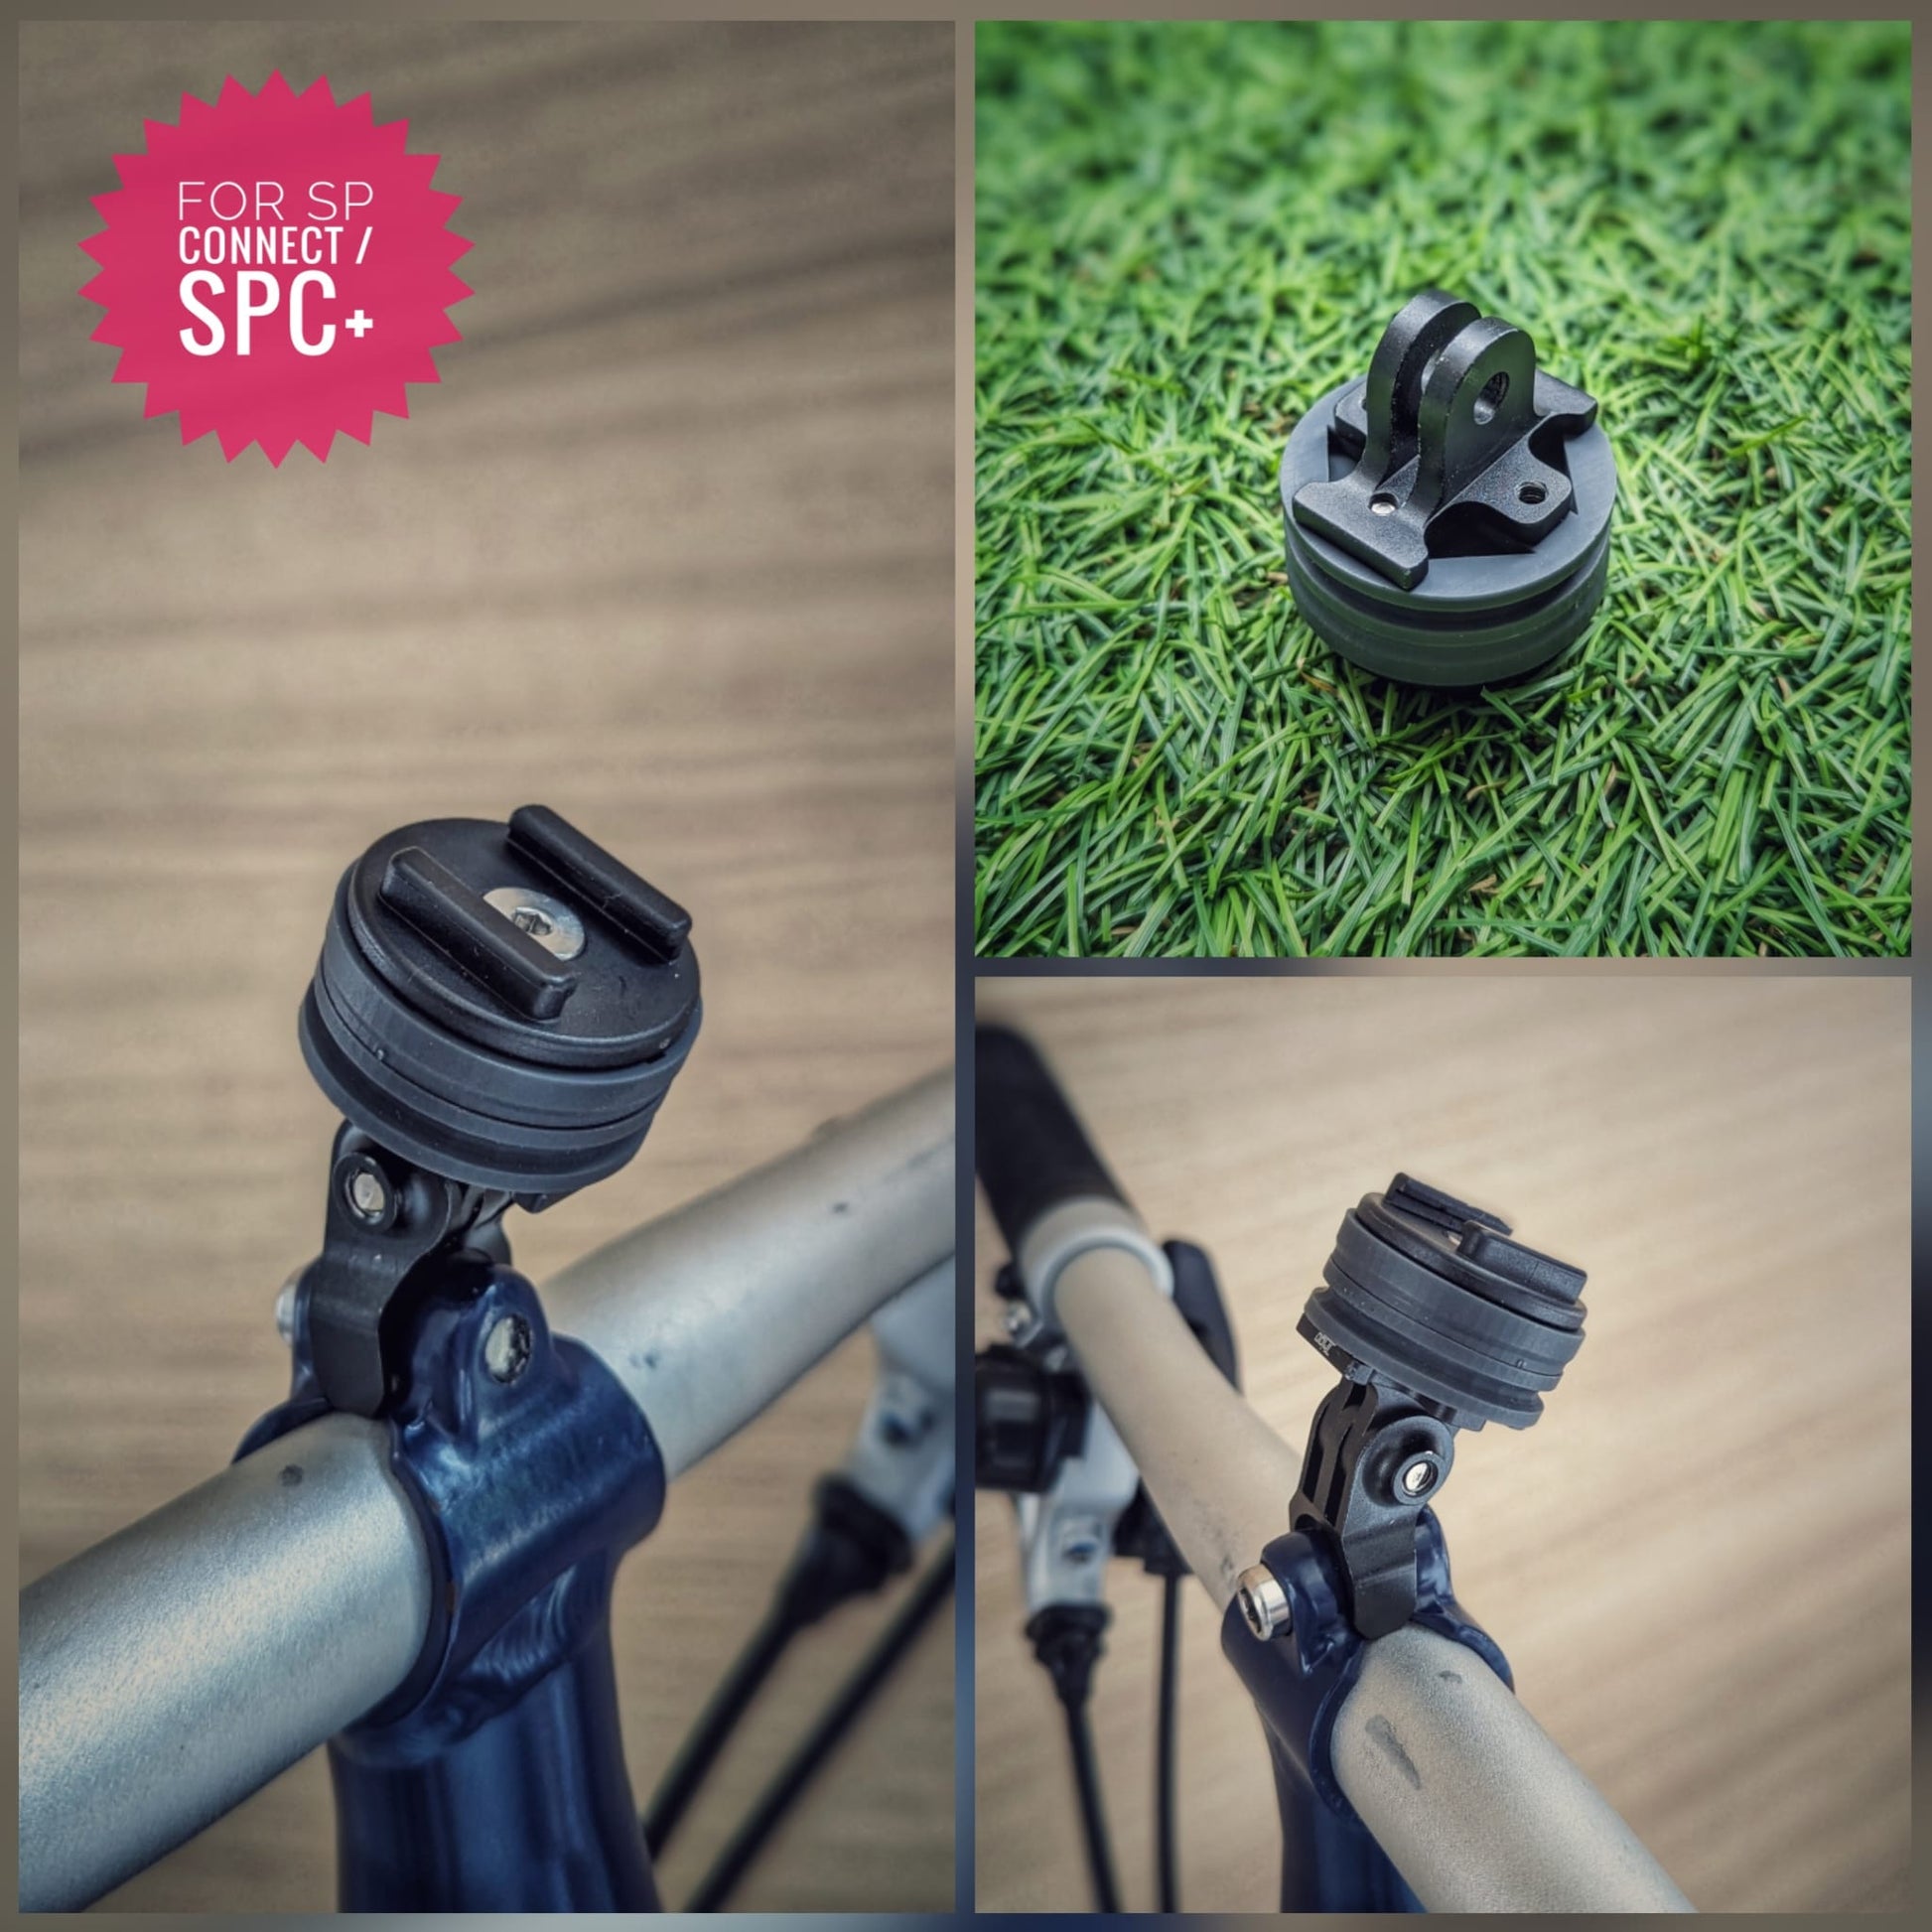 Adjustable Stem Adapter for SP connect or SPC+